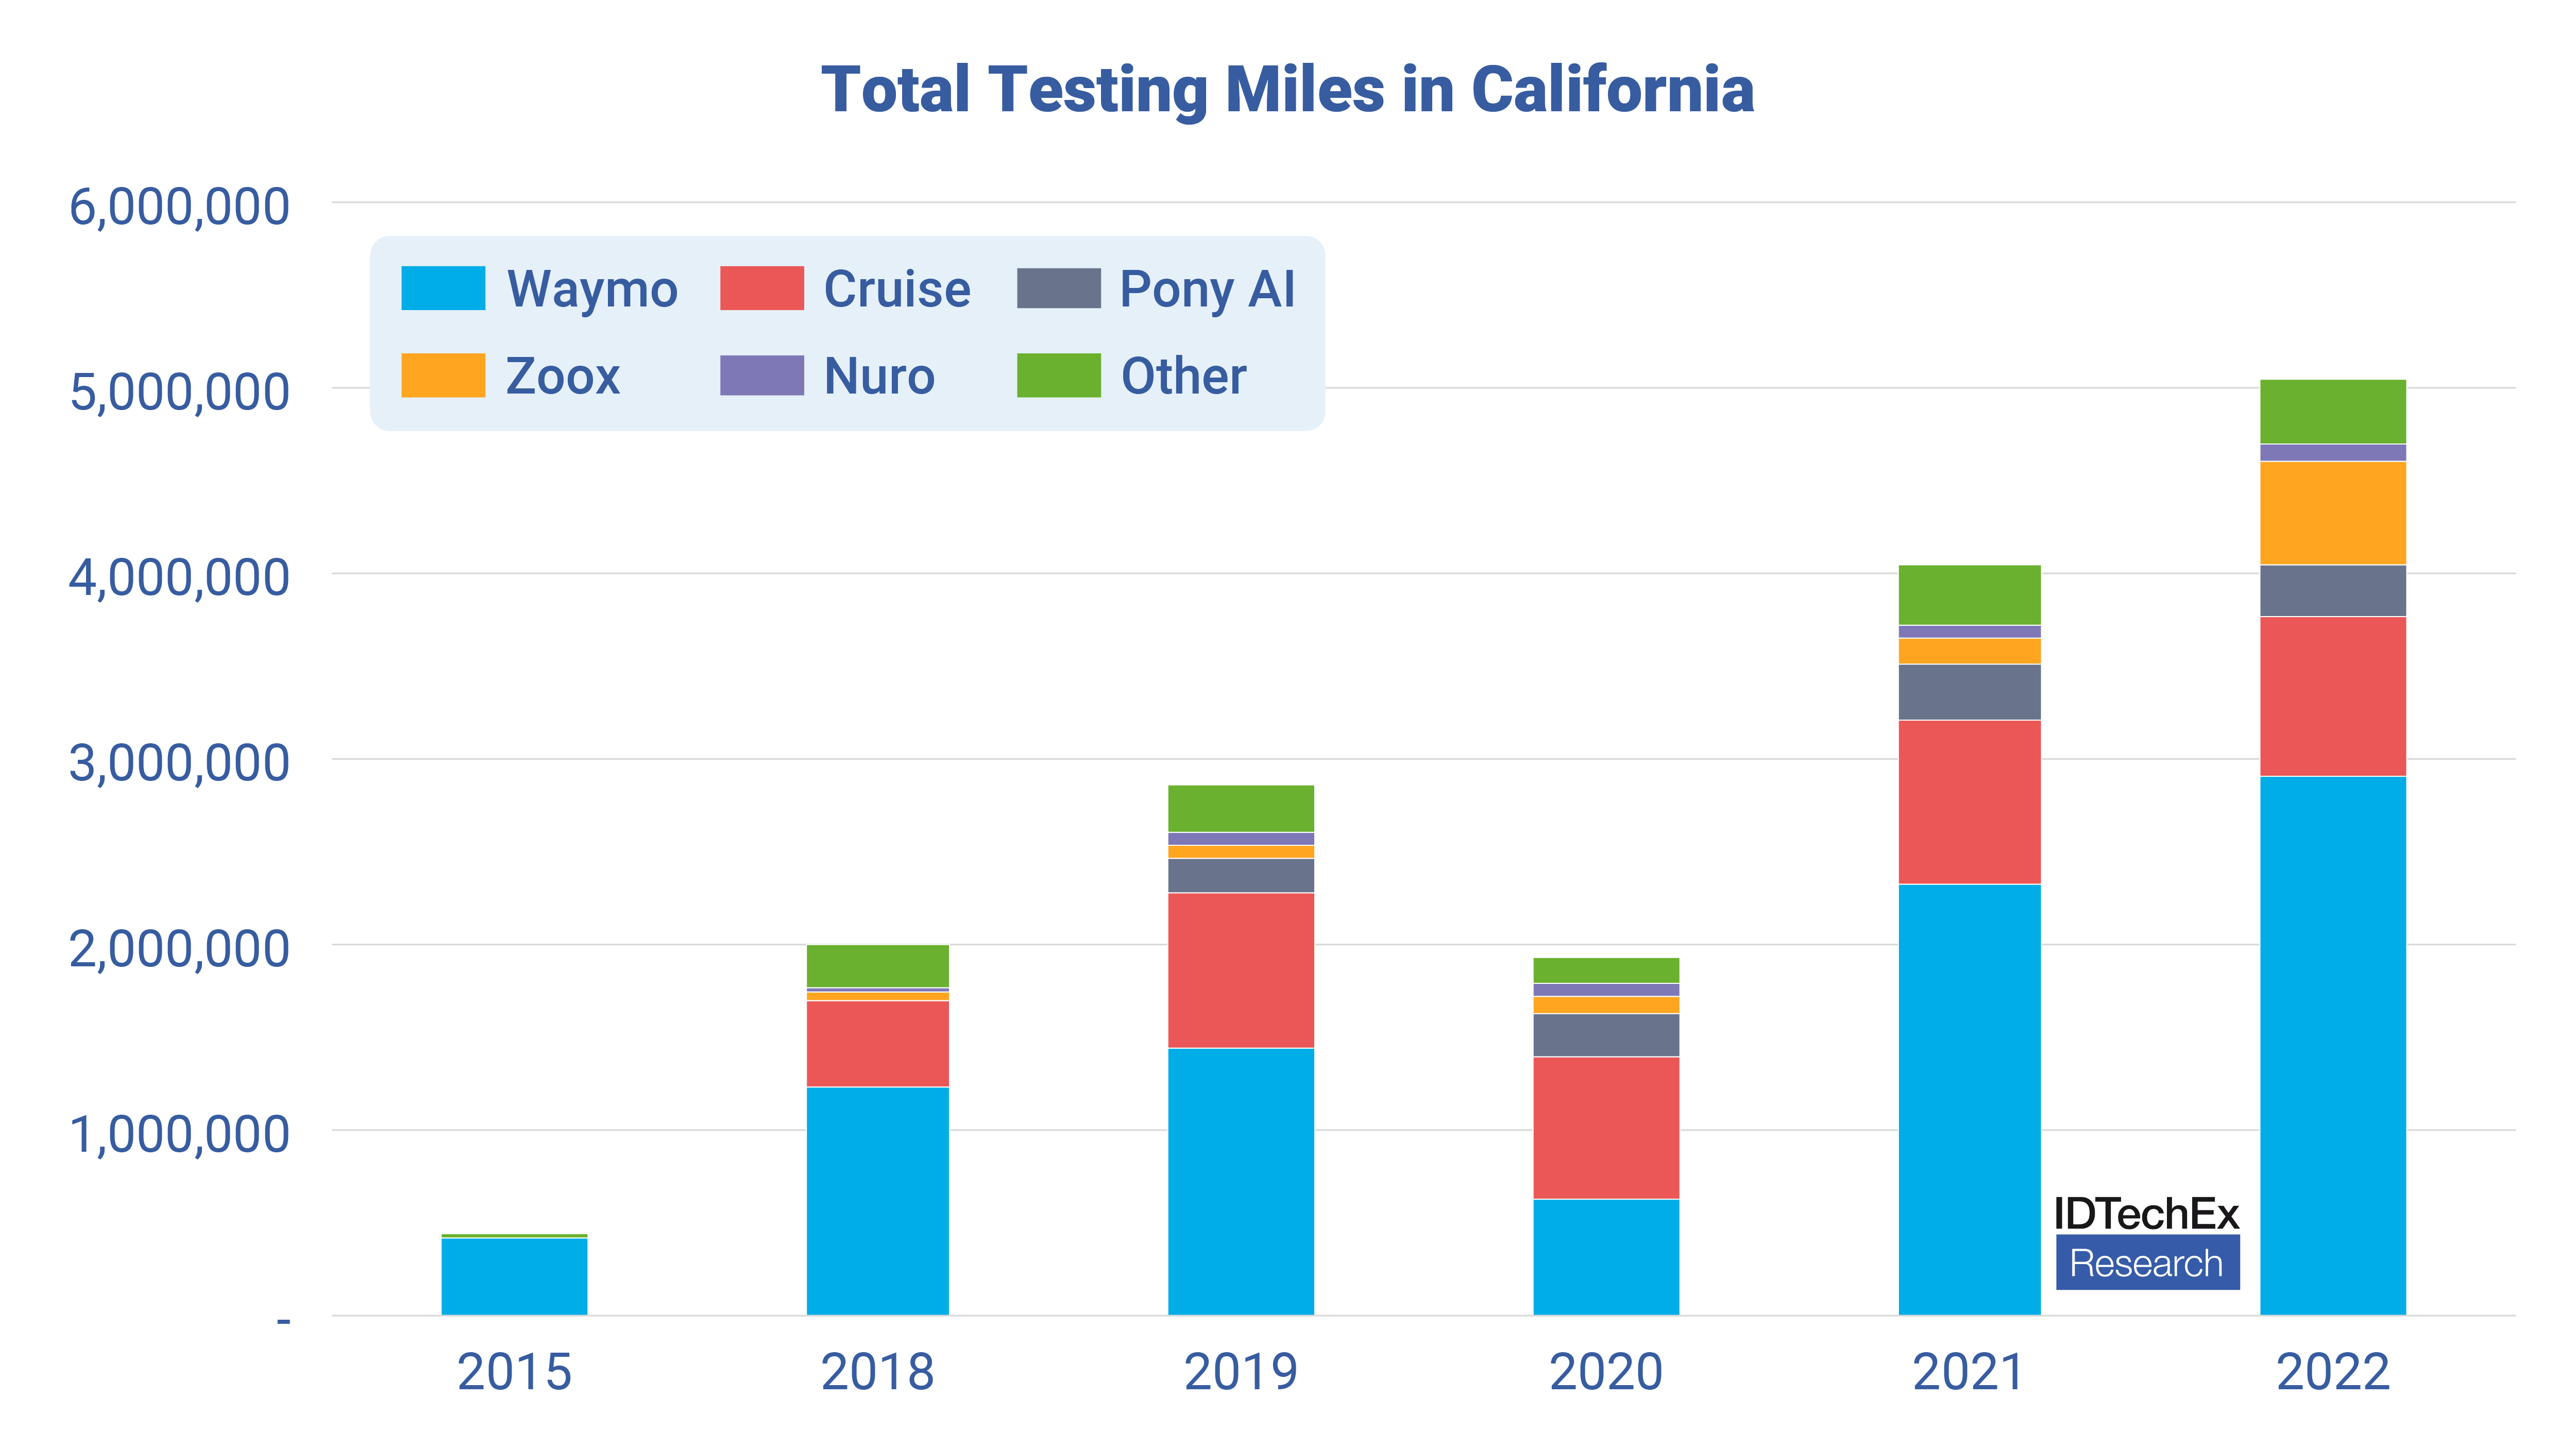 The number of testing miles submitted by the top testing companies in California between 2015 and 2022. Source: IDTechEx